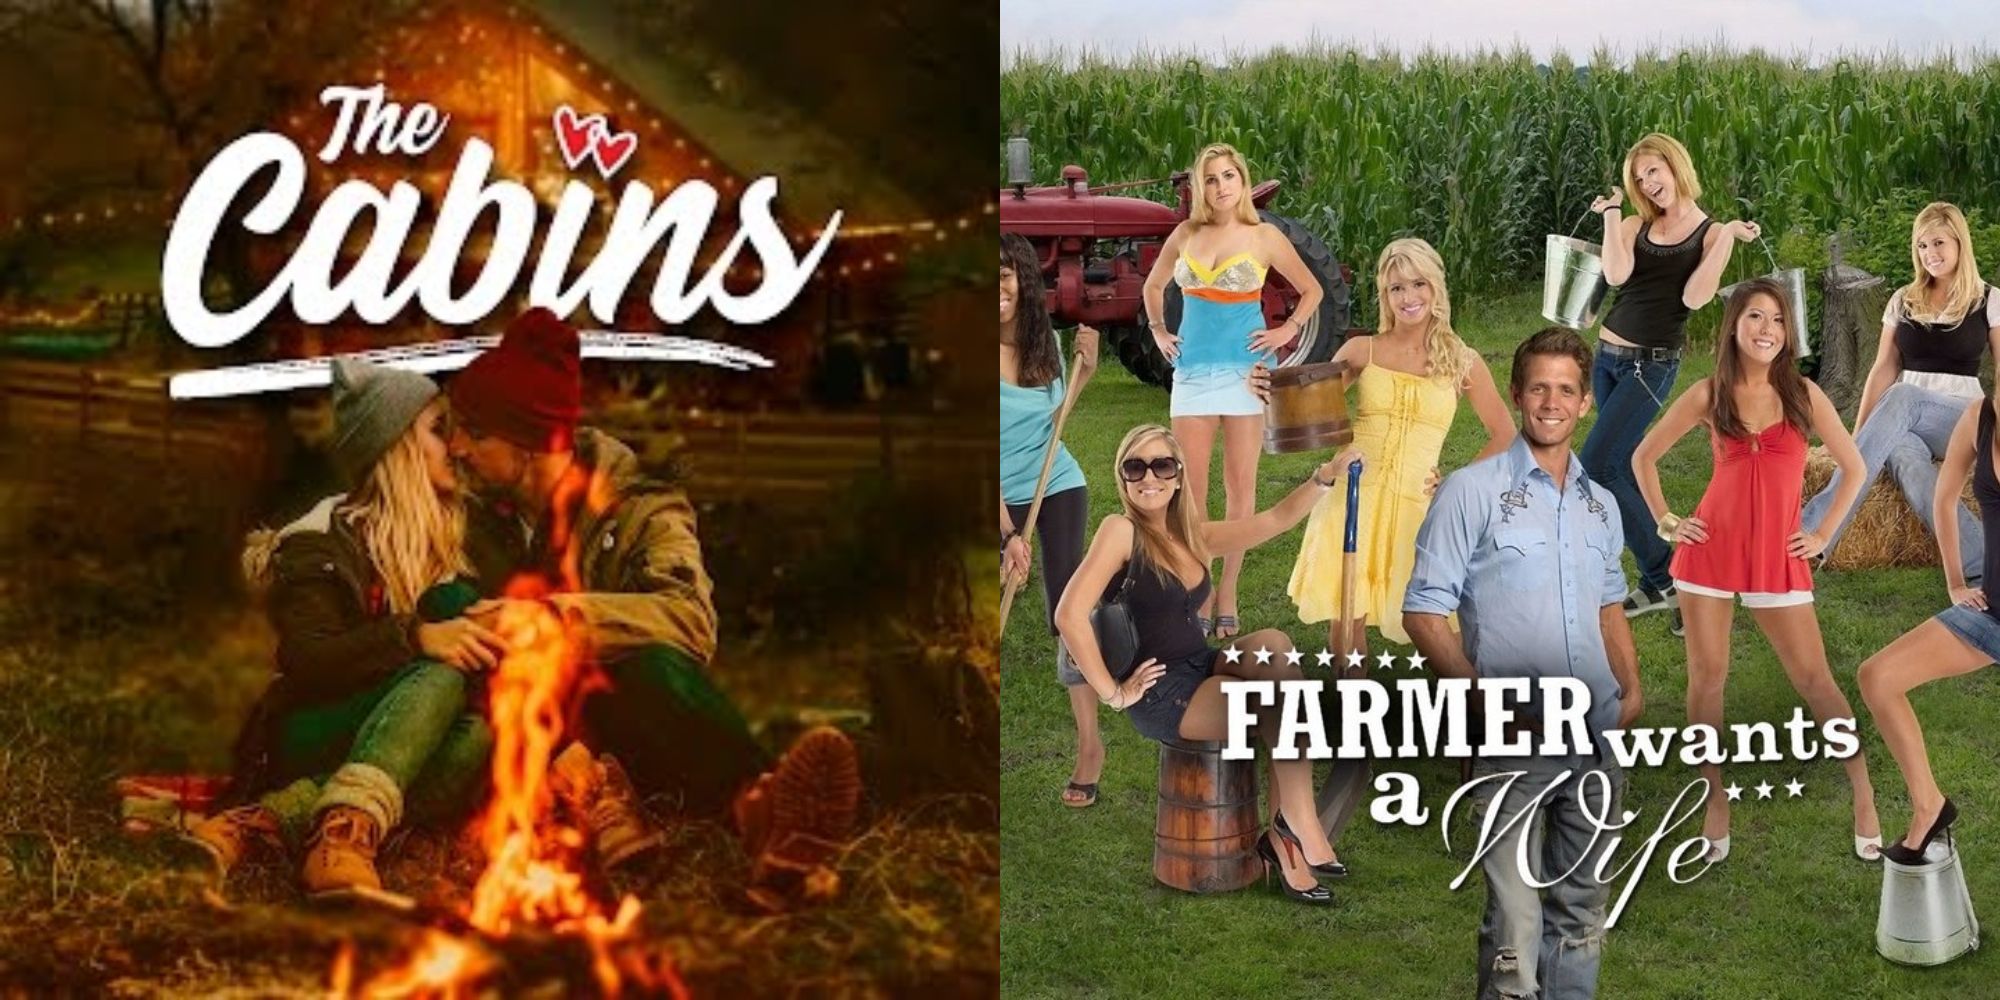 Split image showing posters for The Cabins and Farmer Wants A Wife.